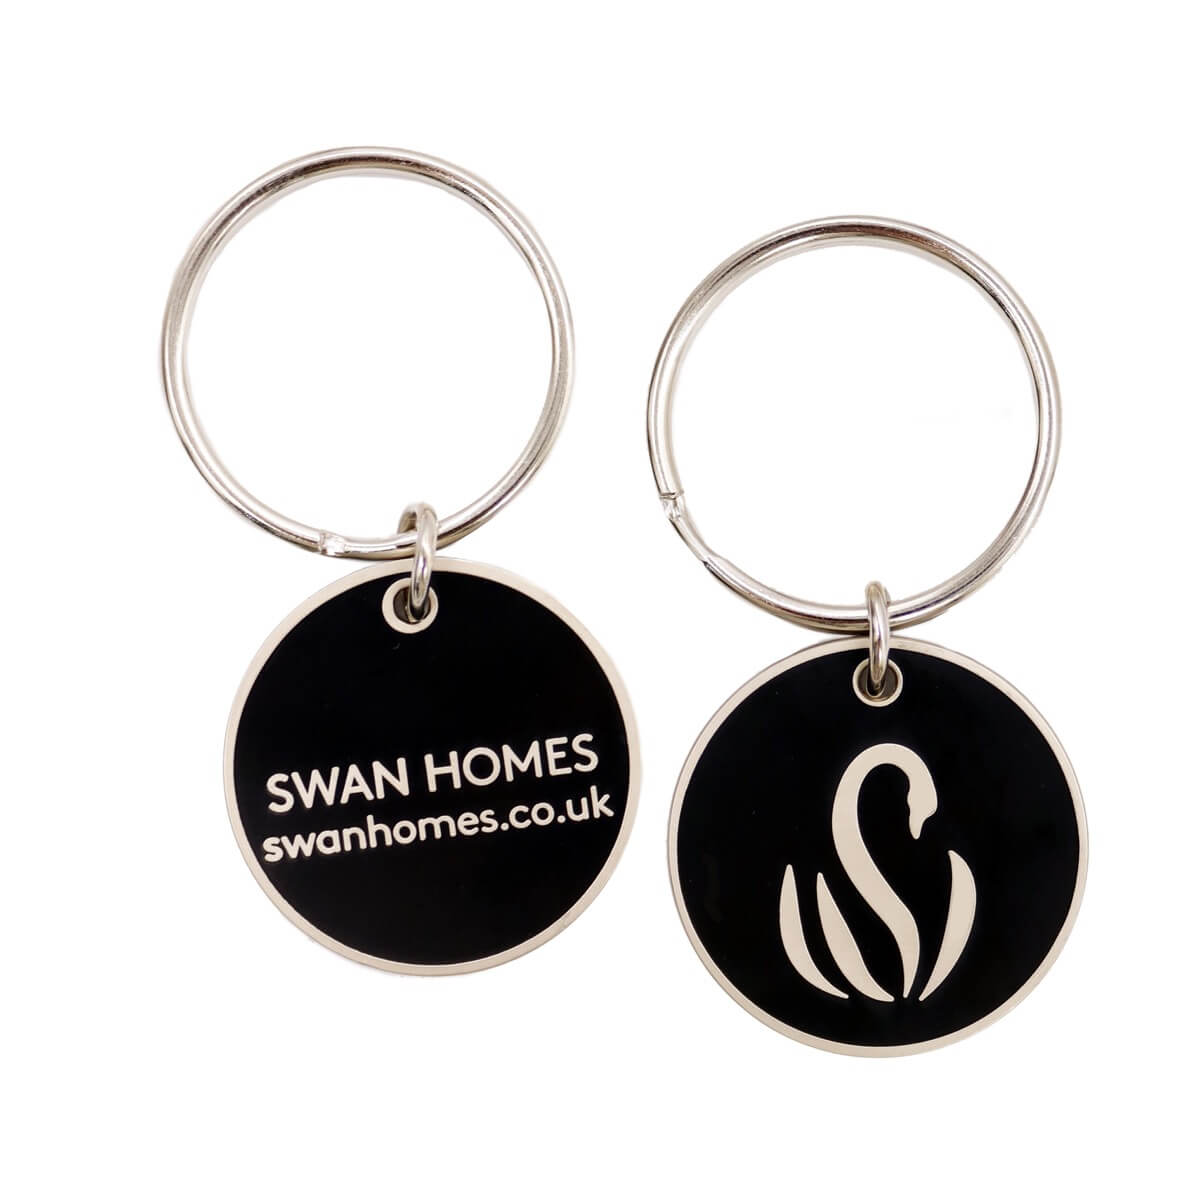 The front and back of a keyring featuring the Swan Homes branding